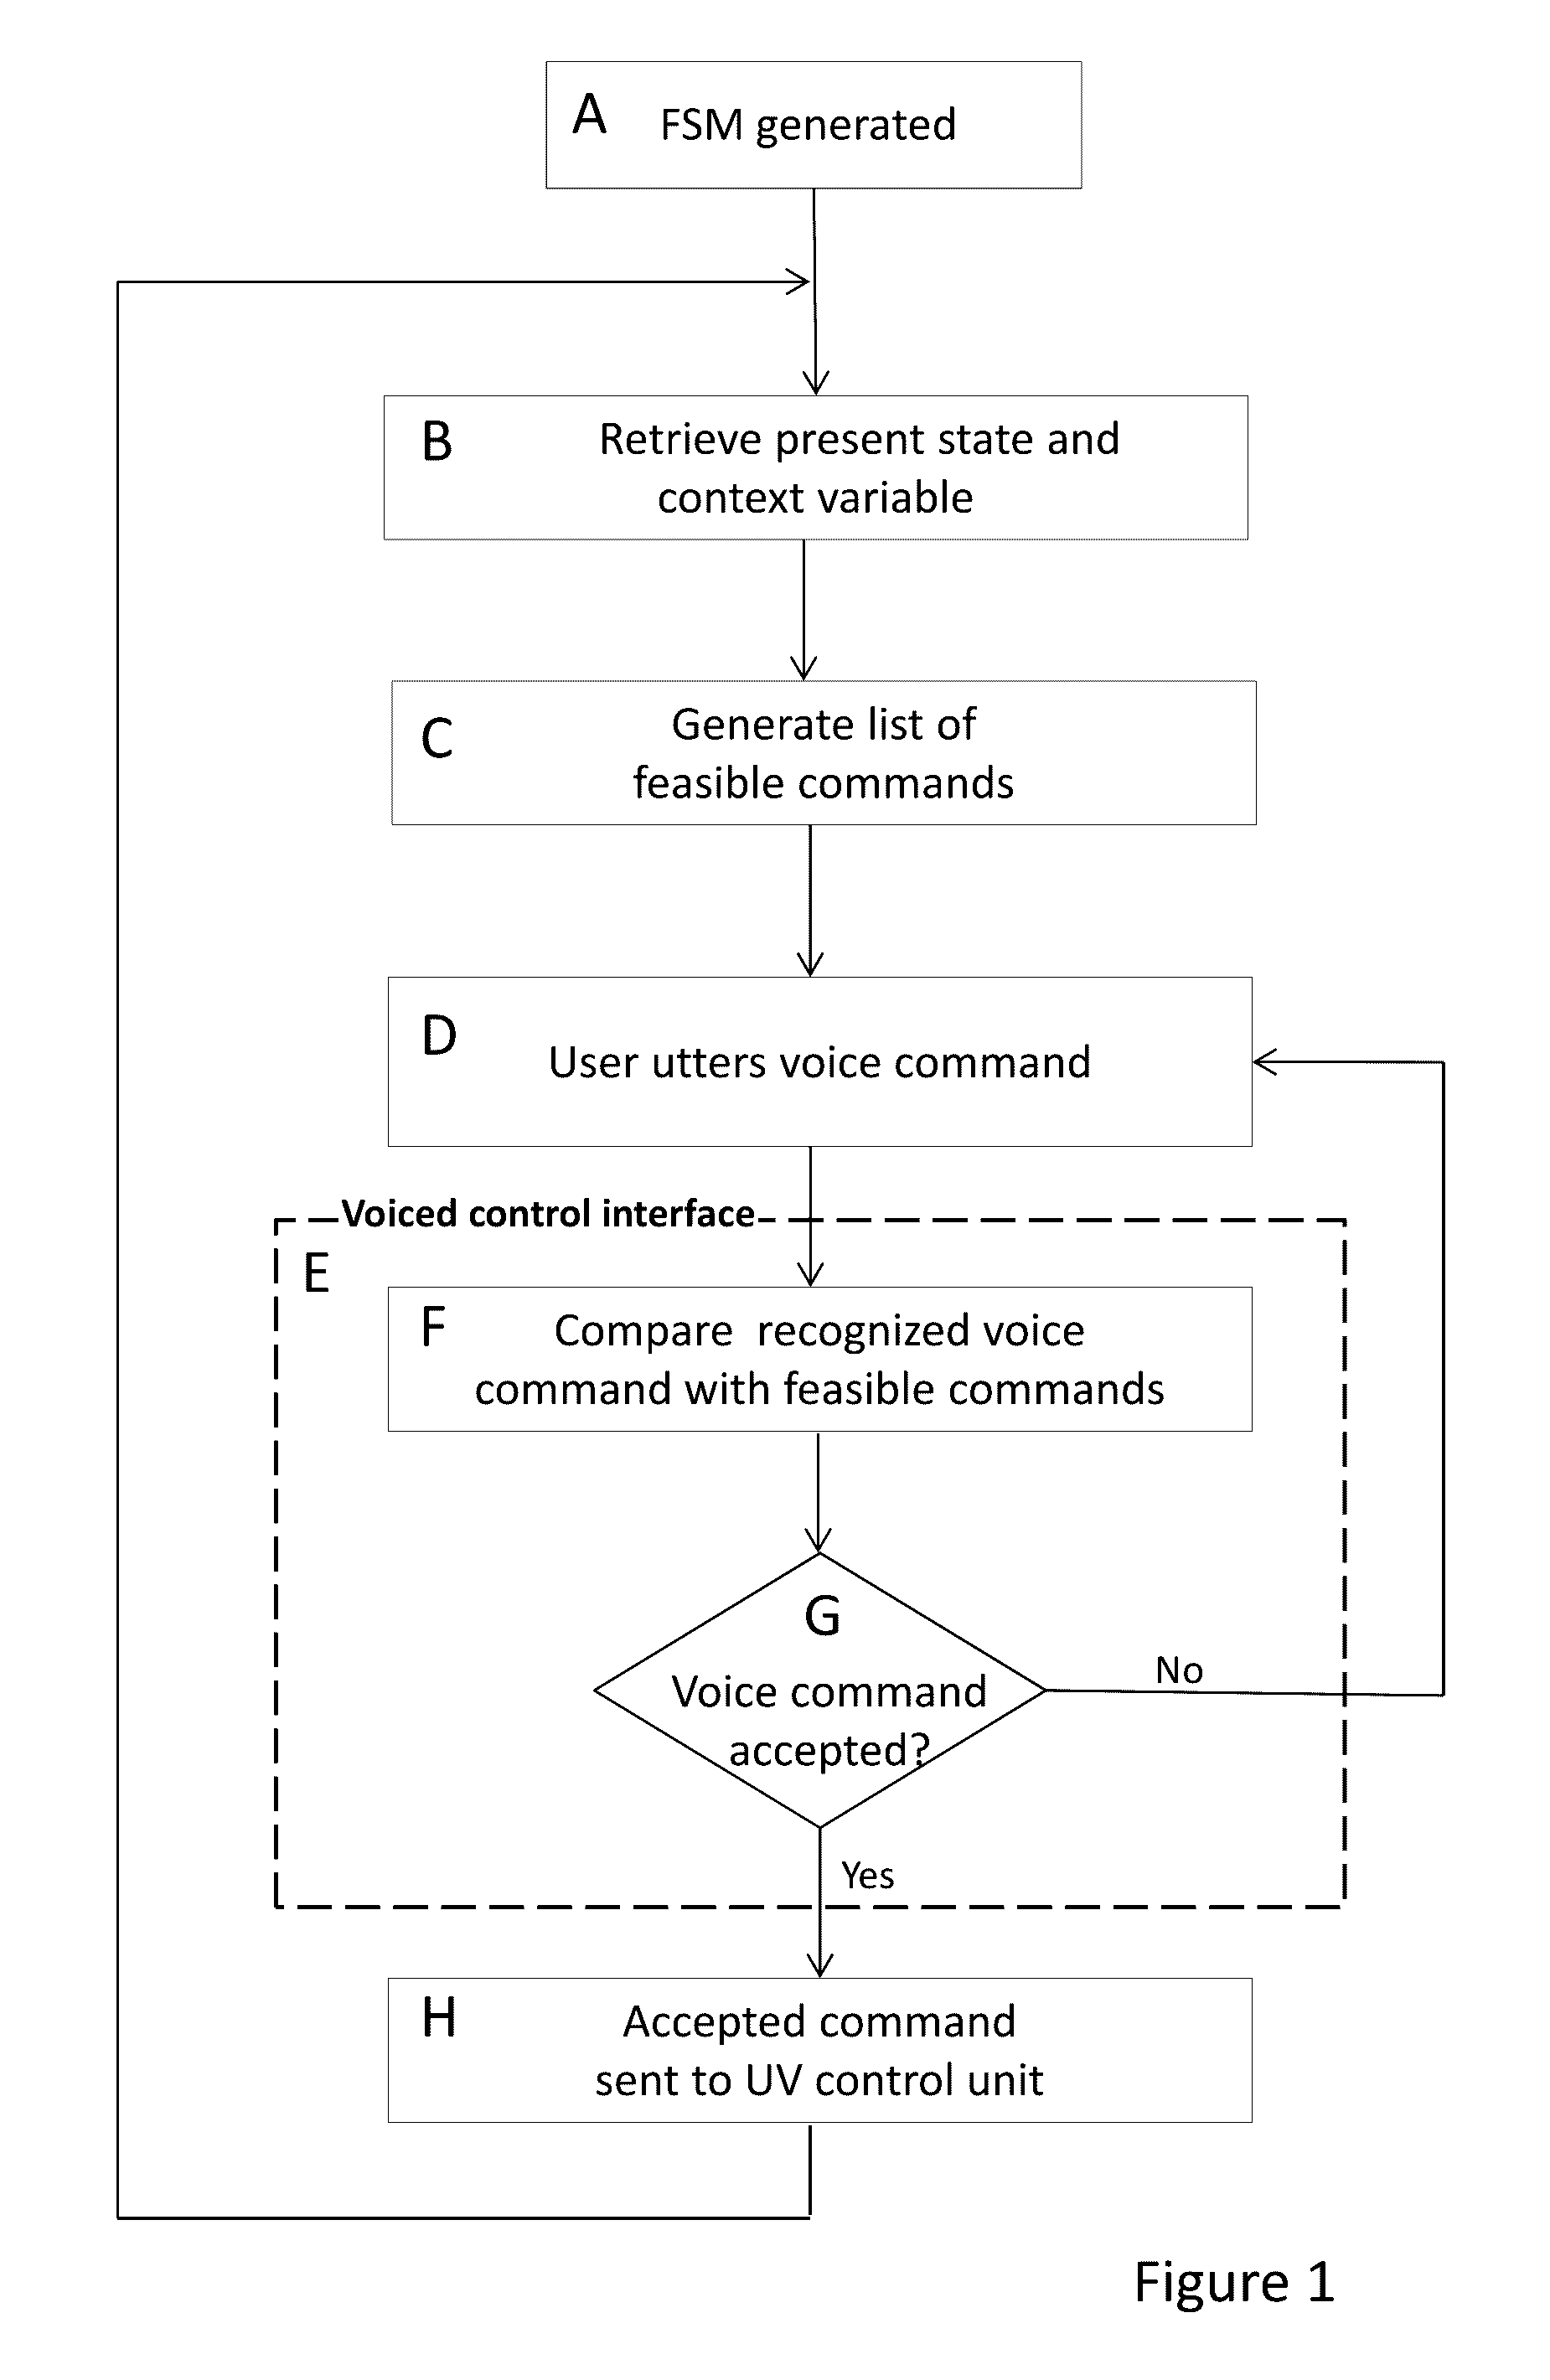 State and context dependent voice based interface for an unmanned vehicle or robot